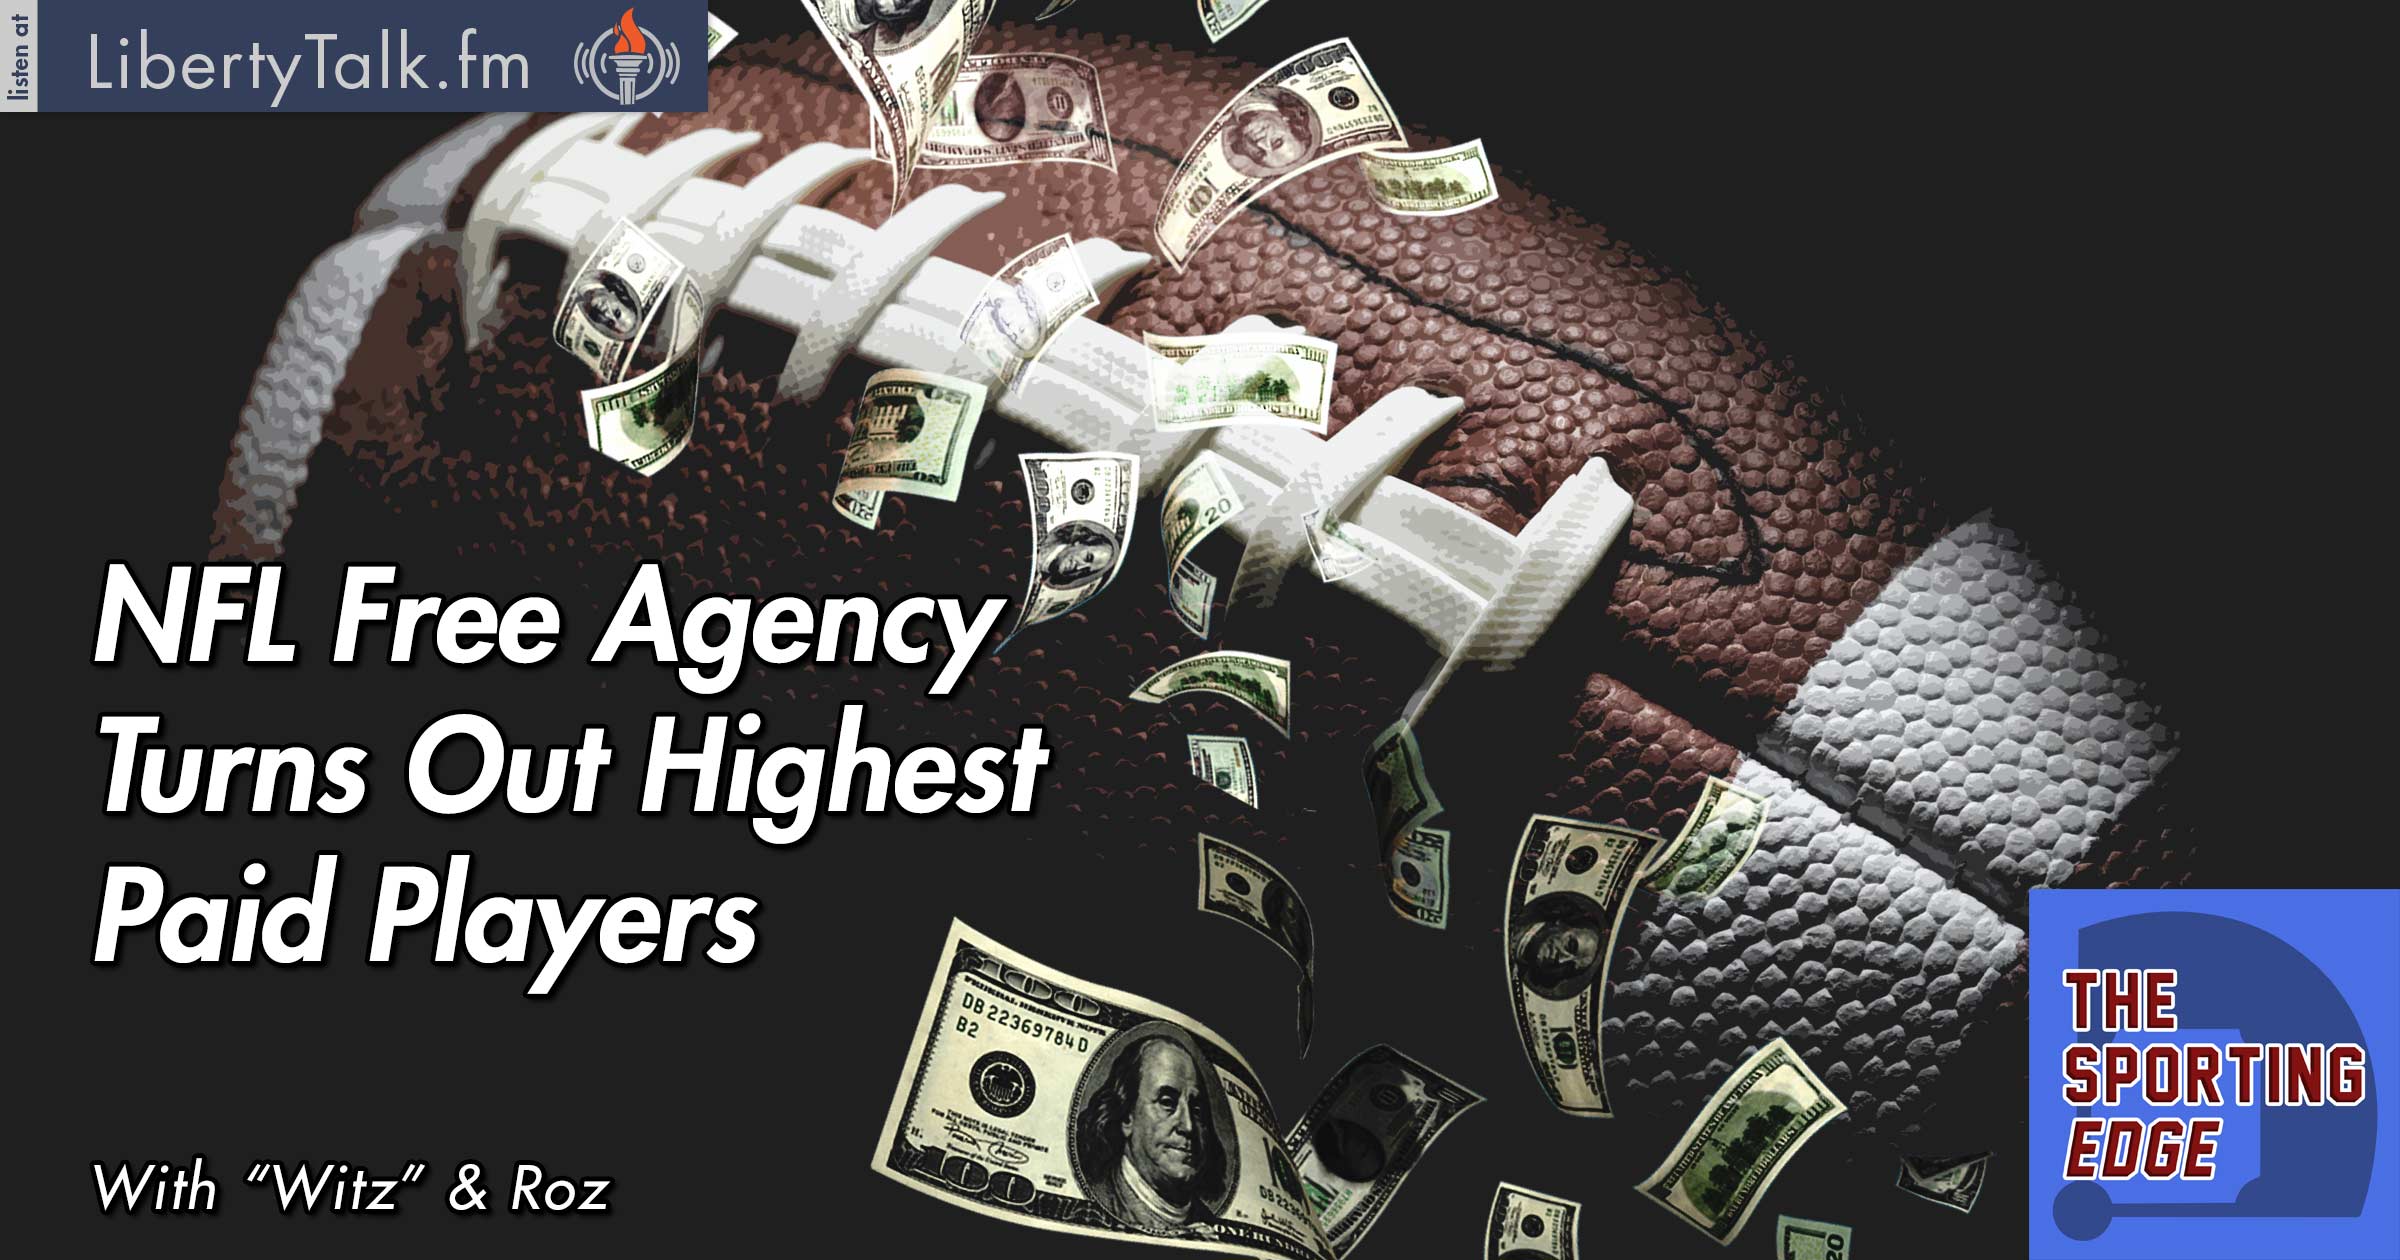 NFL Free Agency Turns Out Some of the Highest Paid - The Sporting Edge